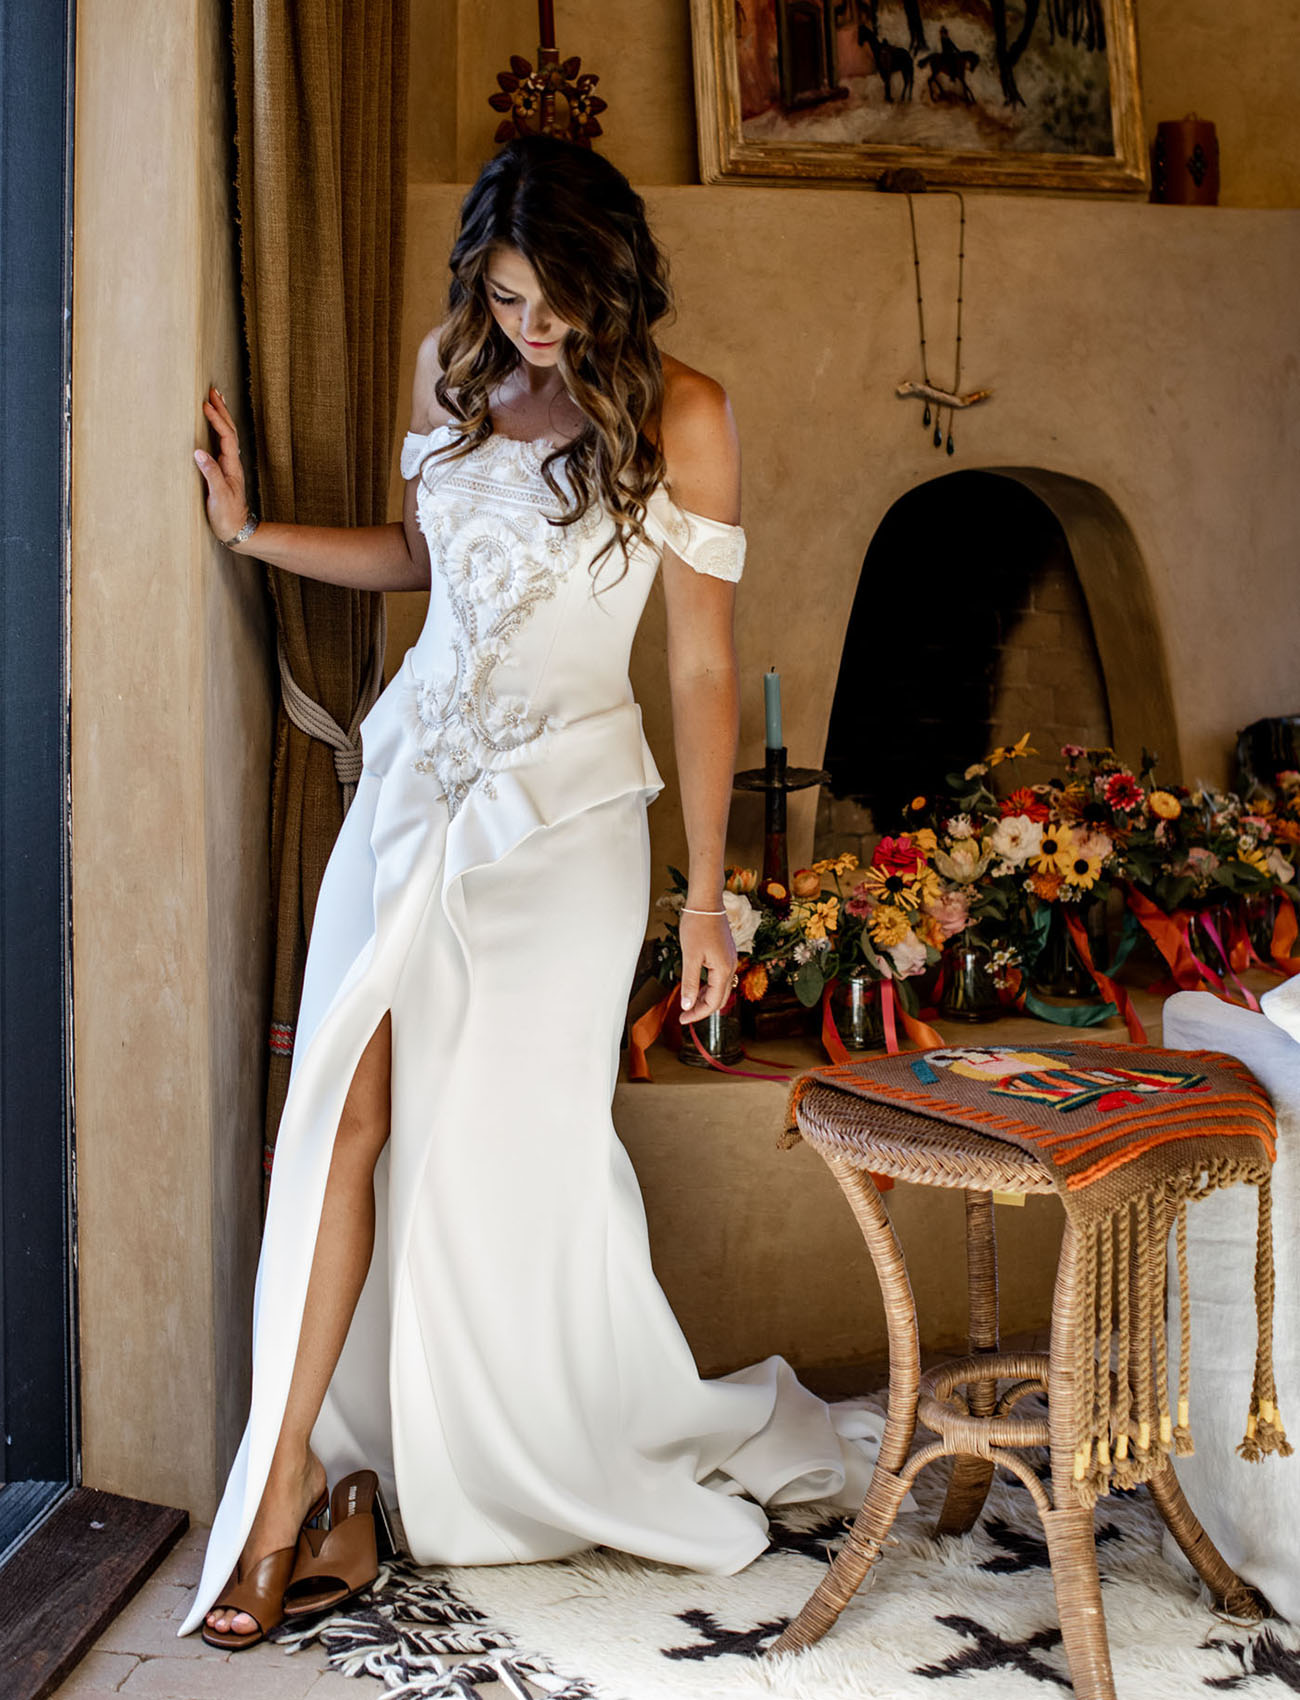 The bride was wearing a fantastic off the shoulder wedding dress with appliques and embroidery and mules